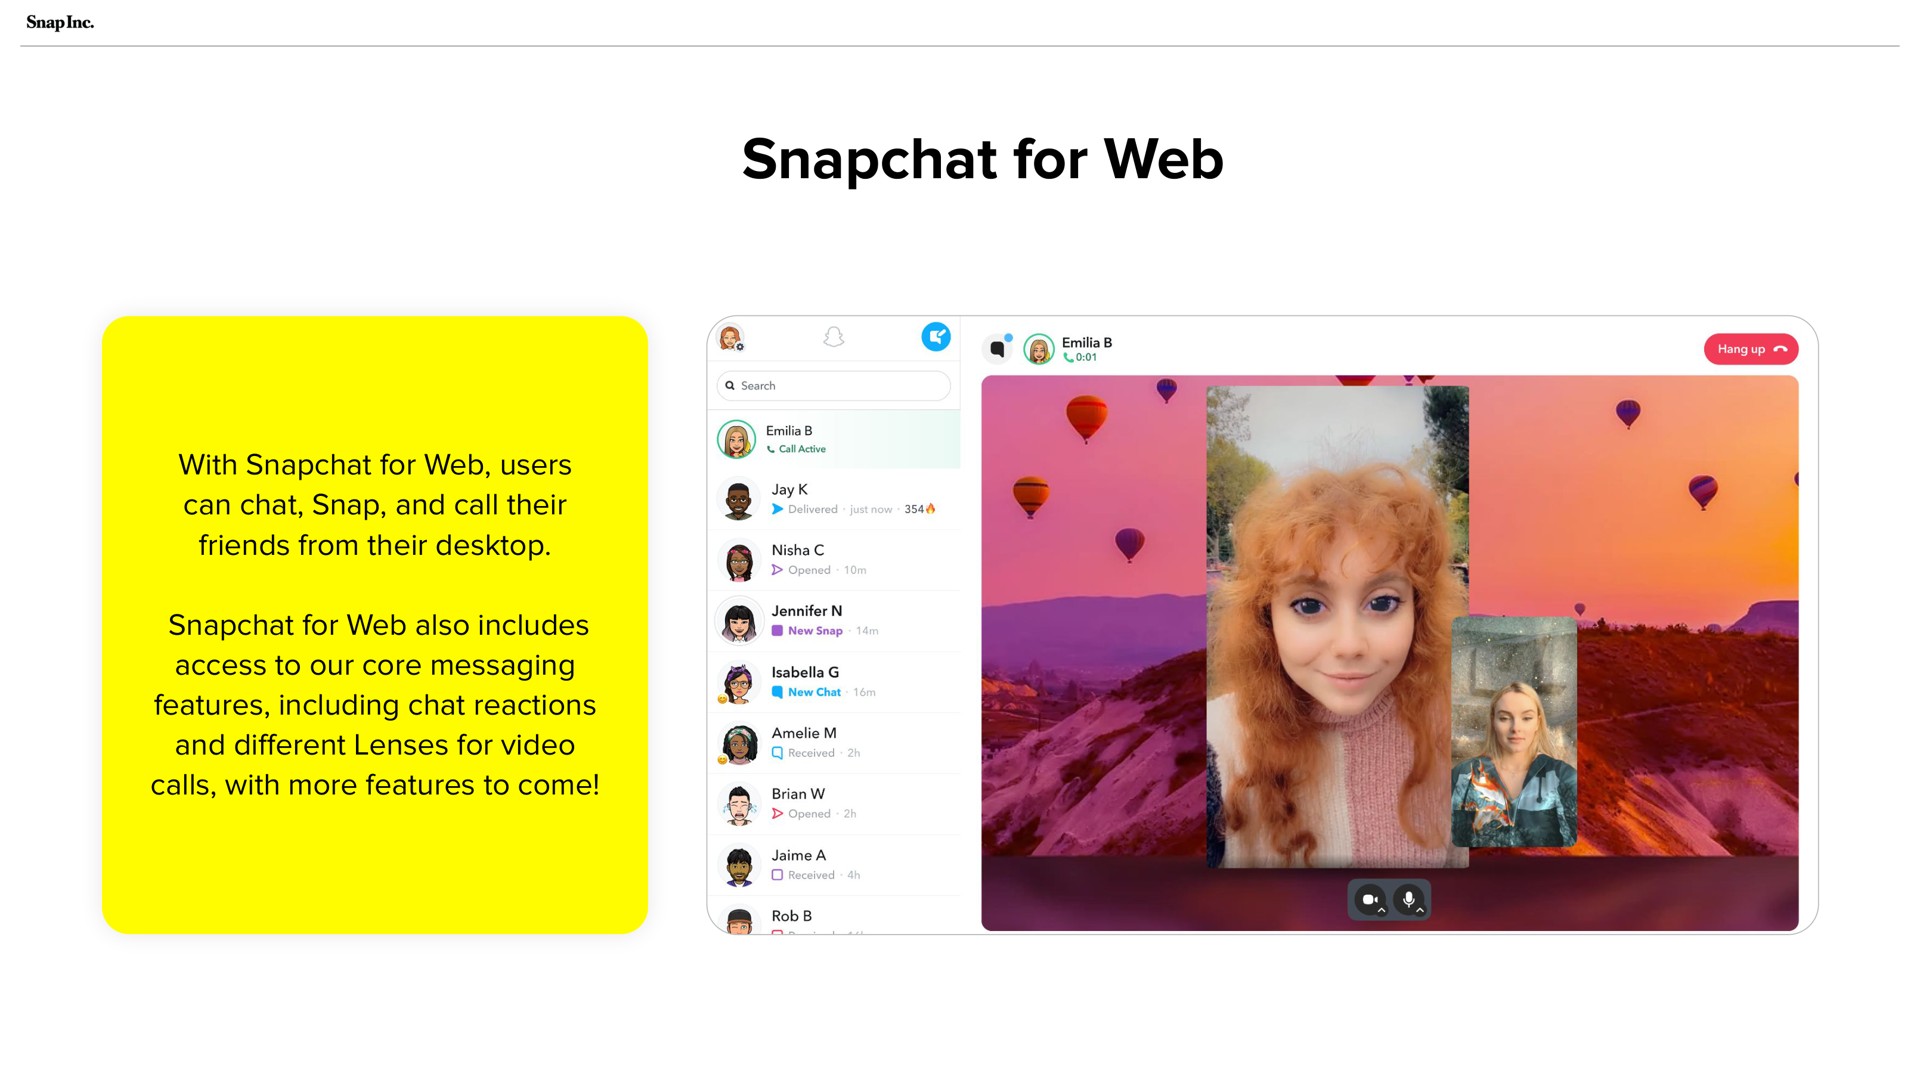 for web also includes features including chat reactions and different lenses video ore | Snap Inc